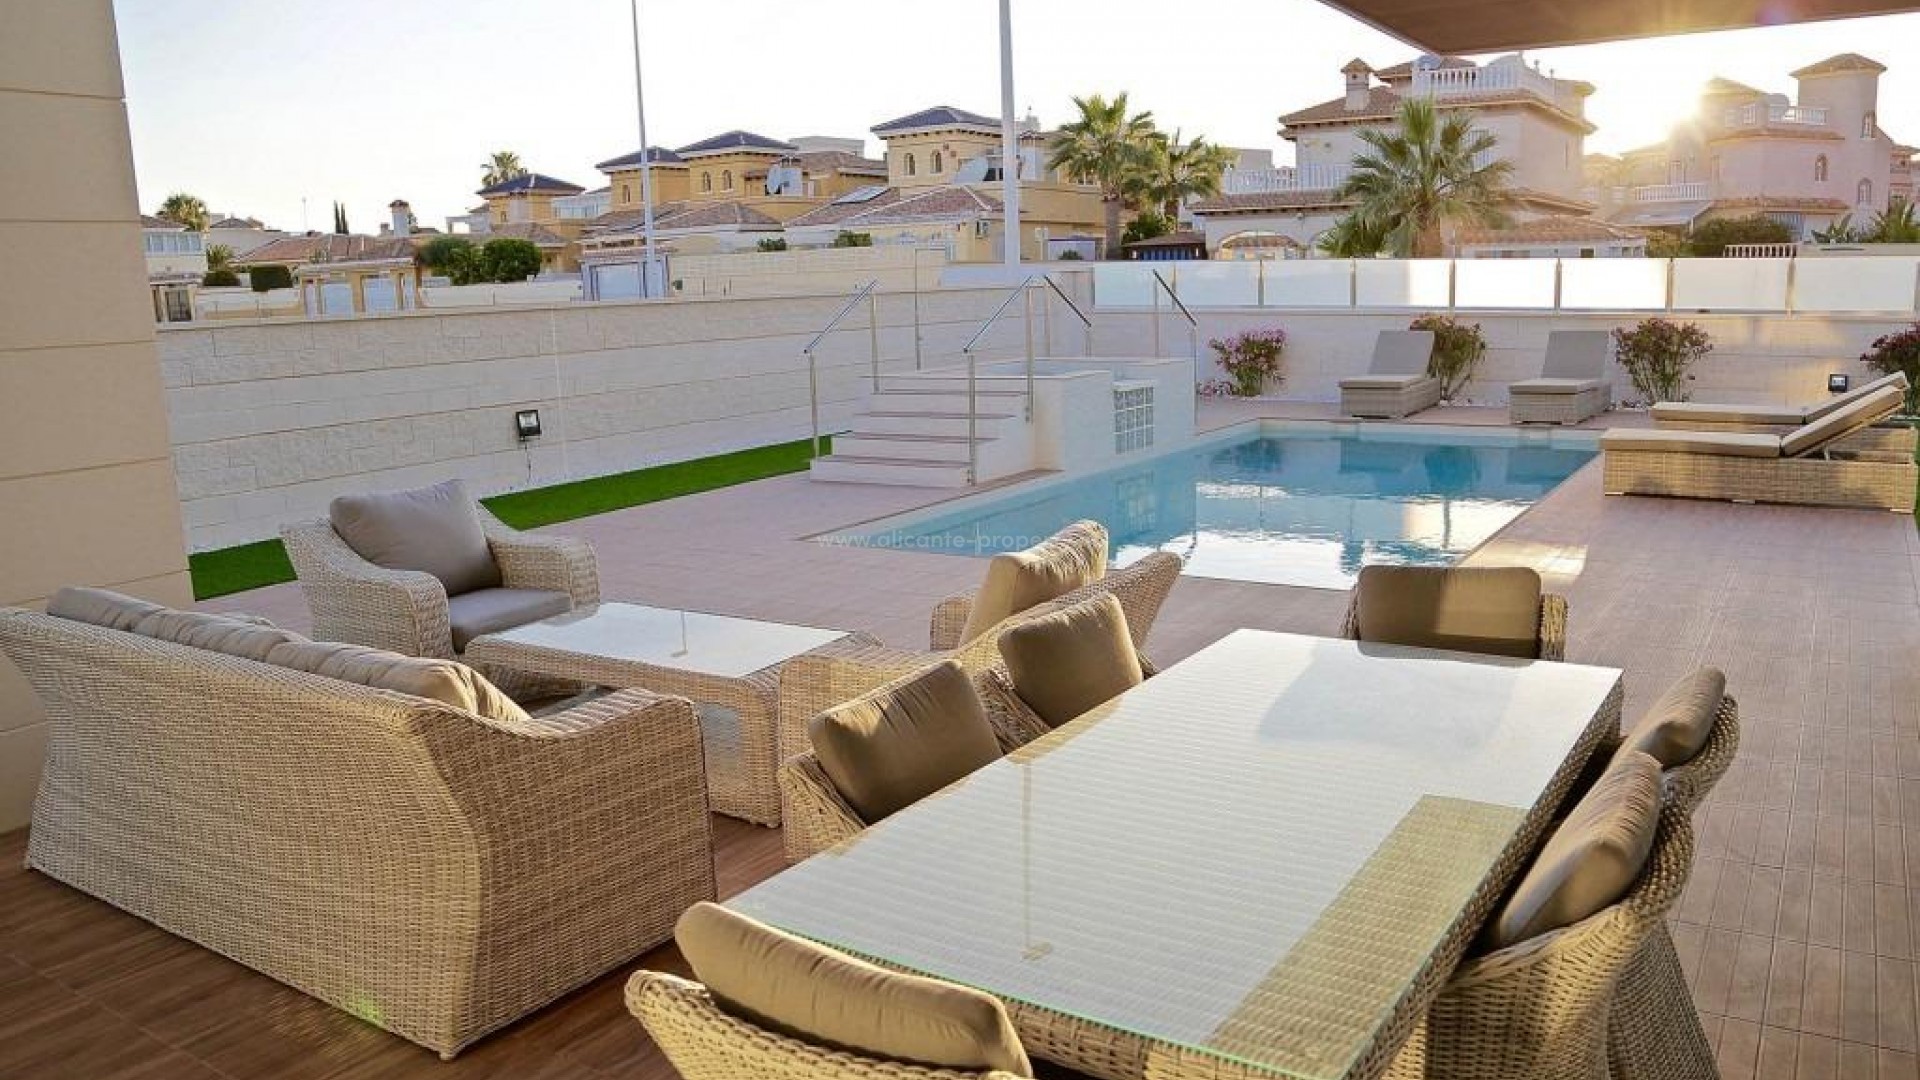 Luxurious villas/houses in the seaside resort of Campoamor on the Orihuela Costa, 700m from the beach, 3 bedrooms, 3 bathrooms. Close to 4 championship golf courses and resorts.